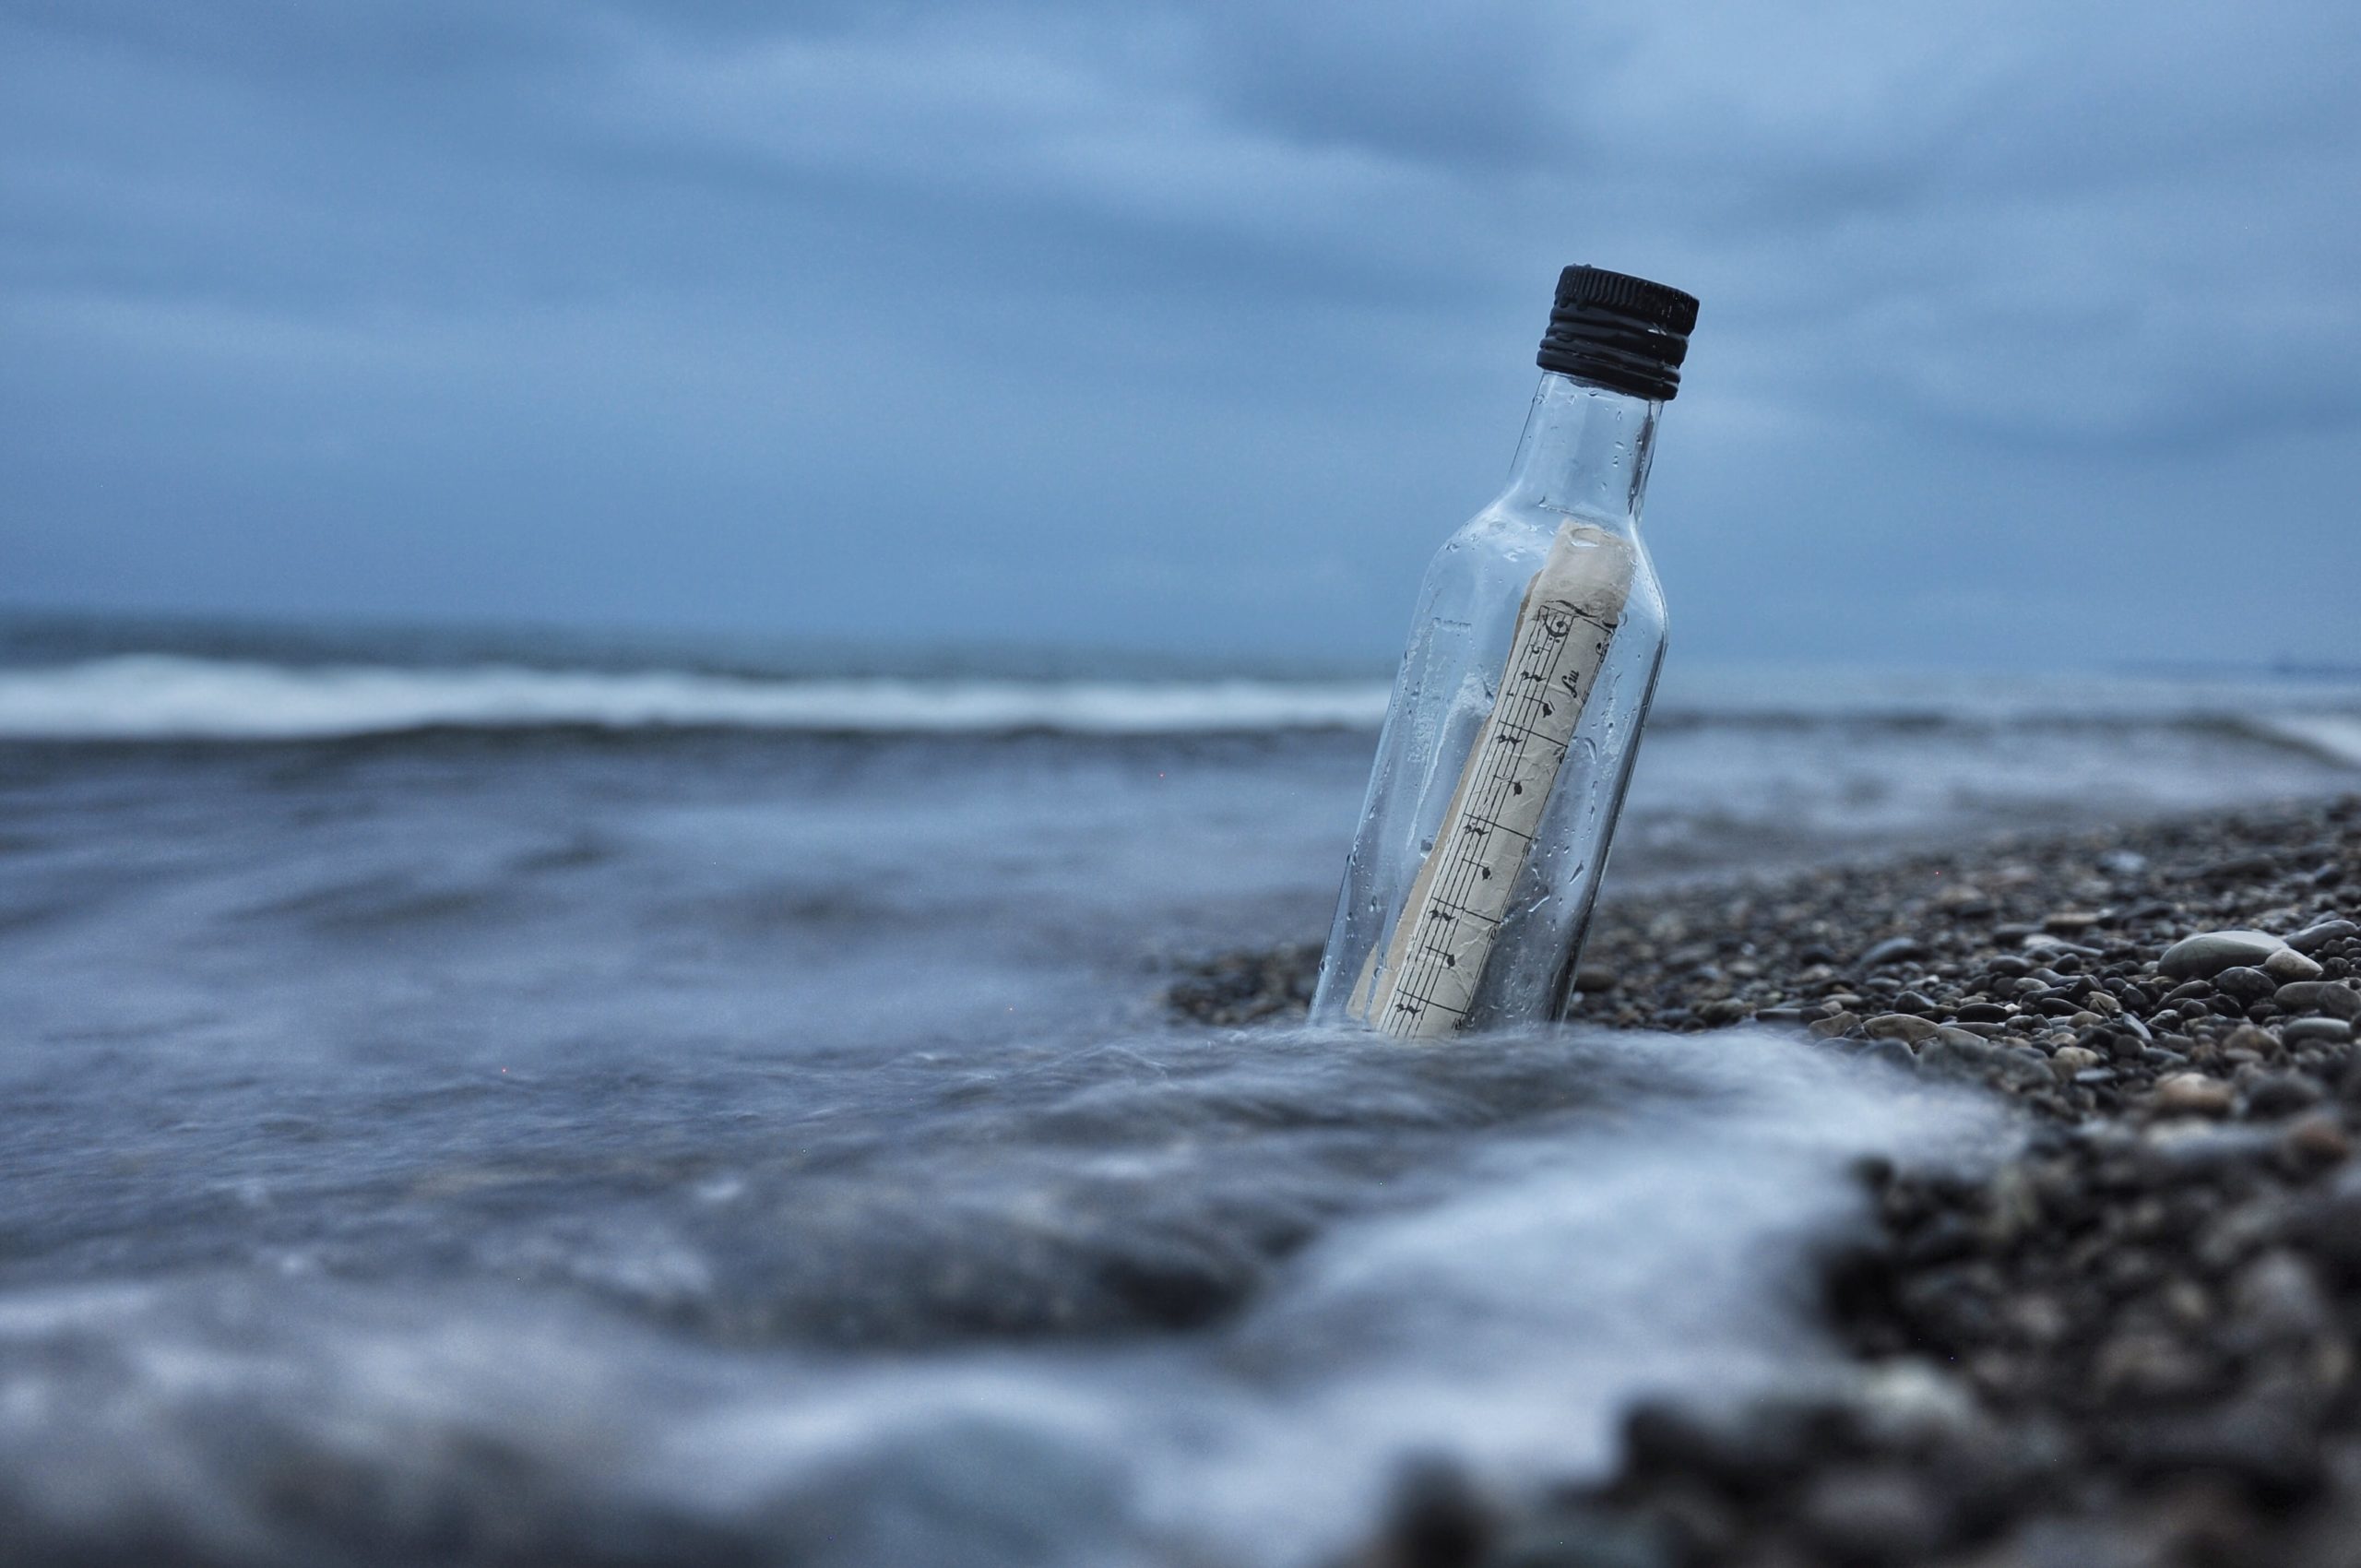 message in a bottle on the beach shore